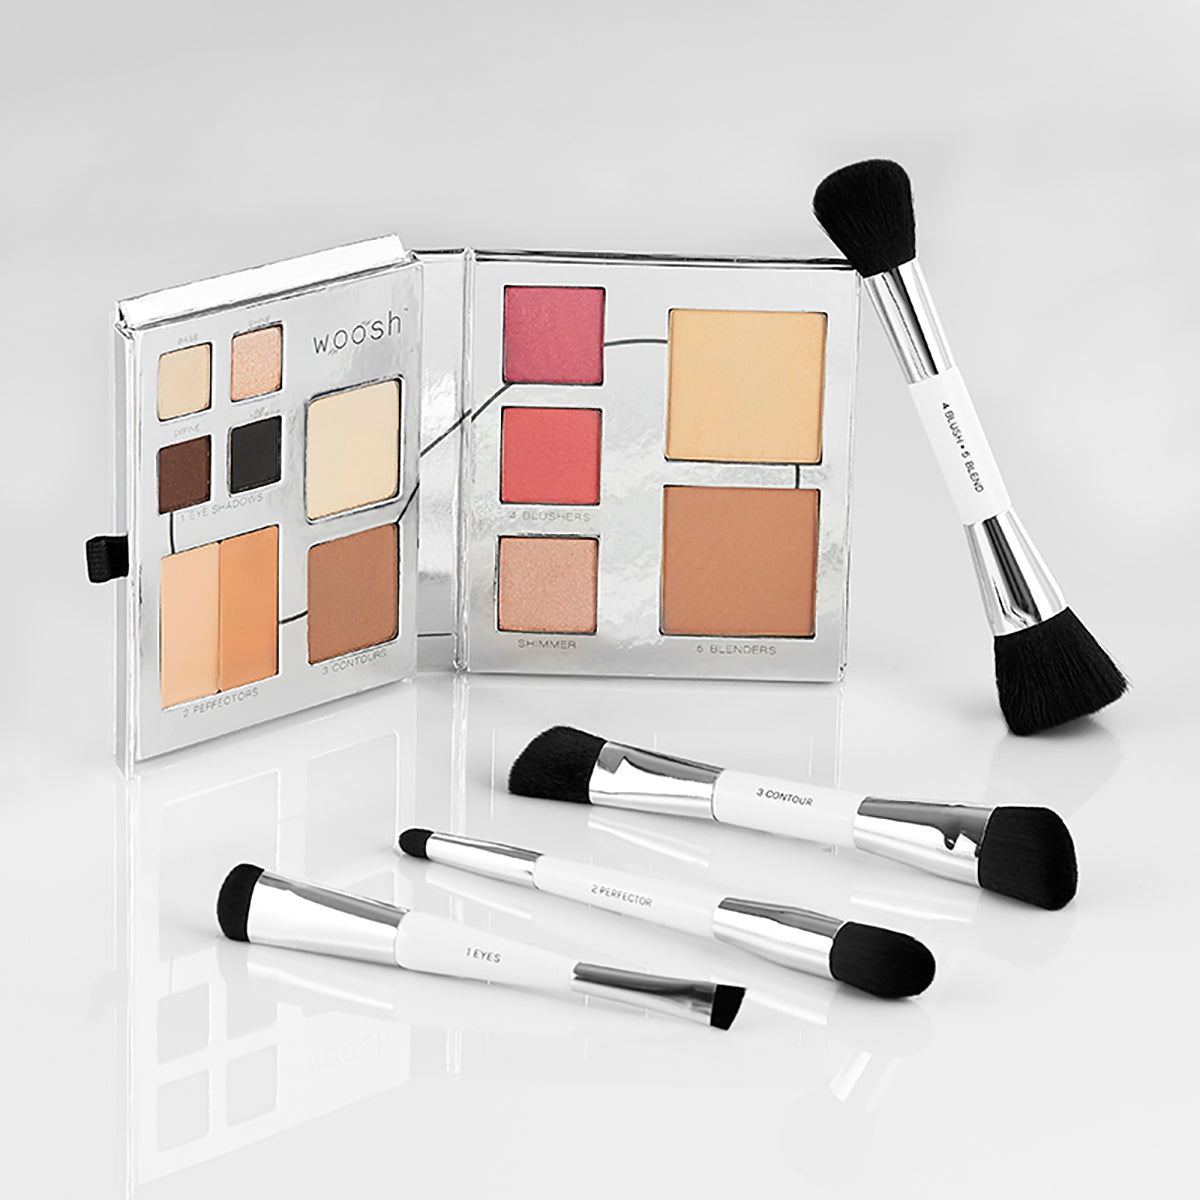 The fold out face palette with four brushes from the essential brush set